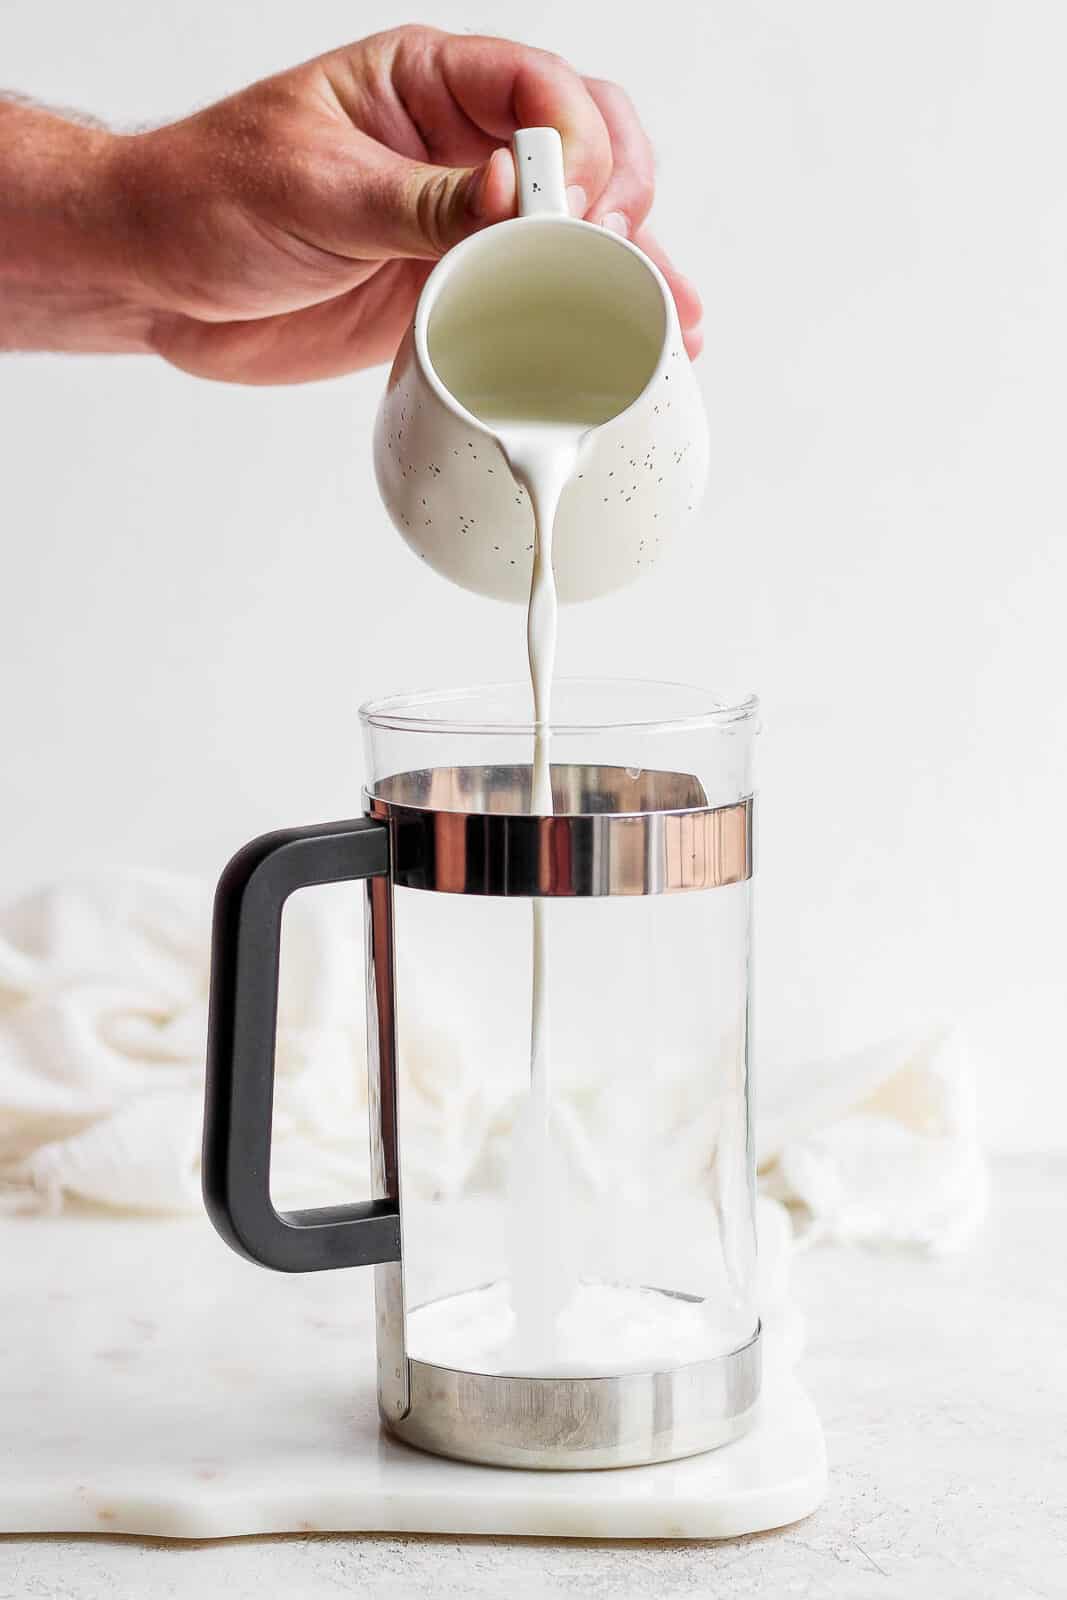 Cold foam ingredients being poured into a french press.